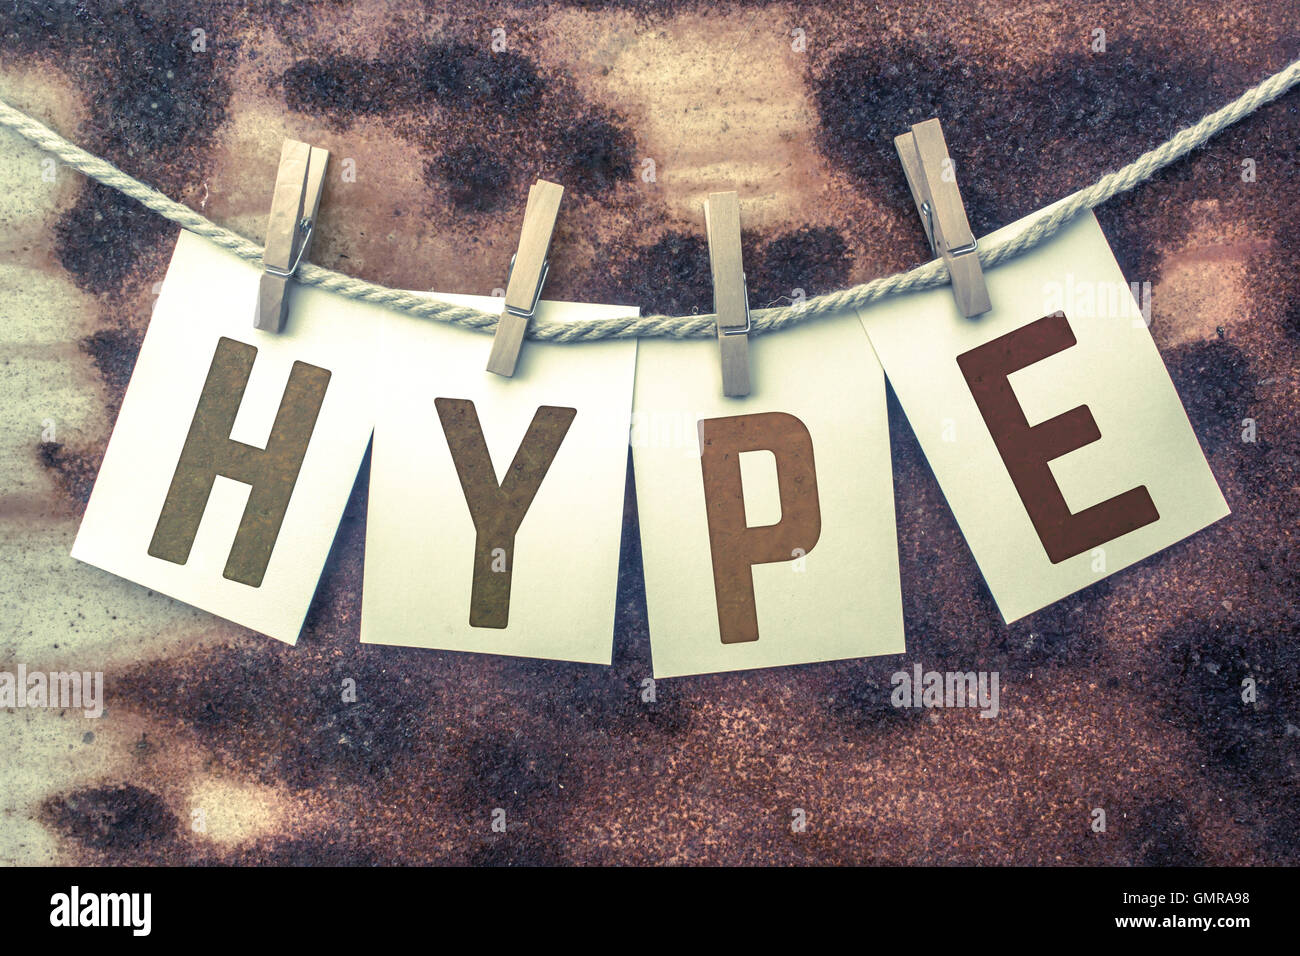 The Word Hype Stamped On Cards And Pinned To An Old Piece Of